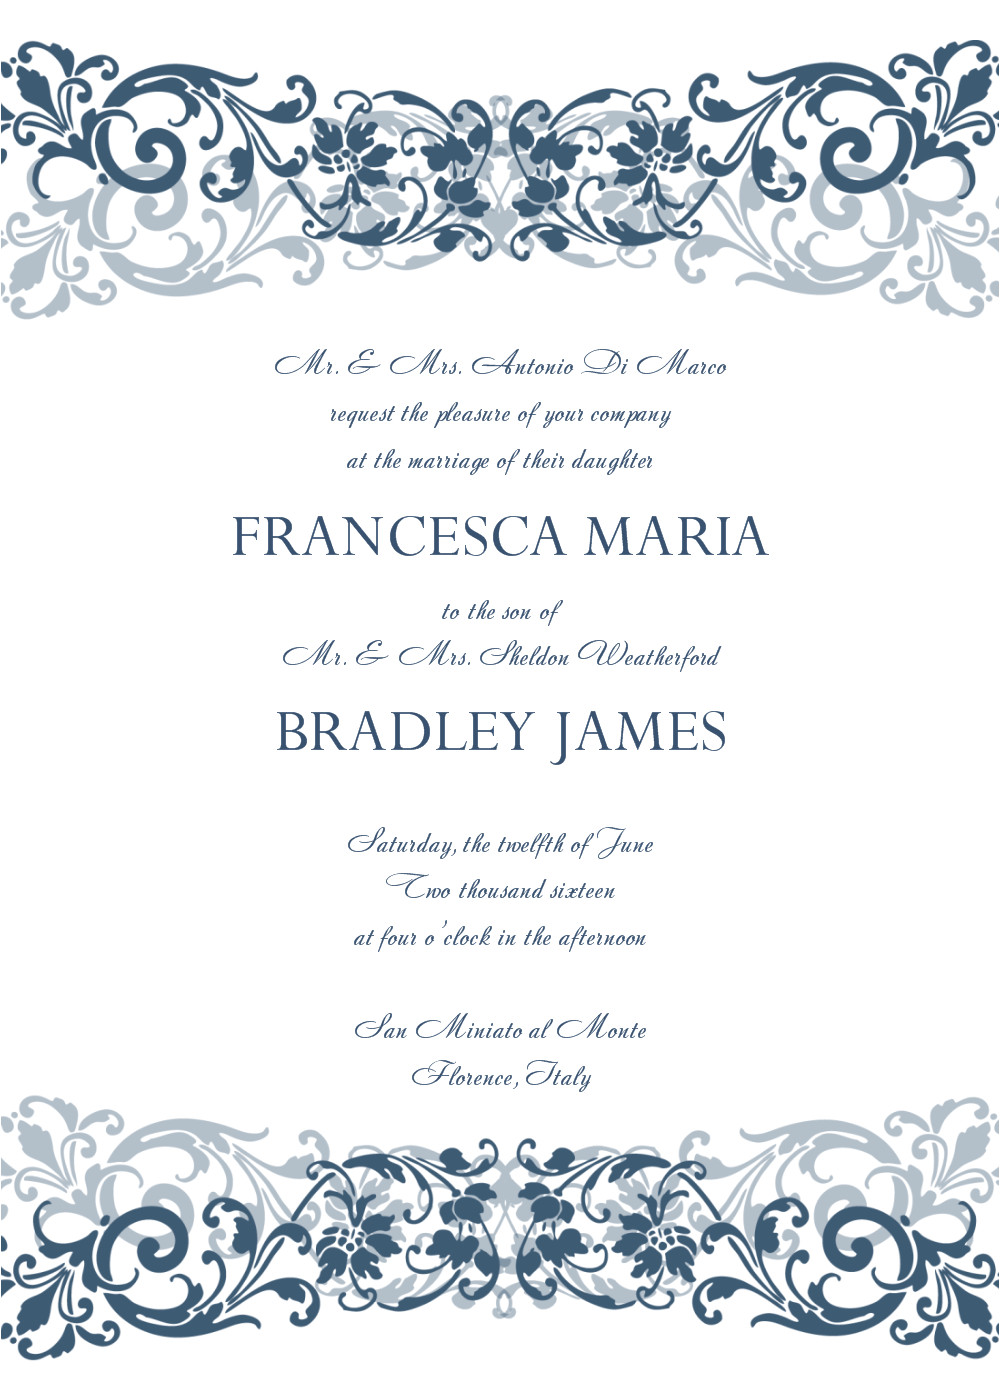 Wedding Invitation Template In Word 8 Free Wedding Invitation Templates Excel Pdf formats